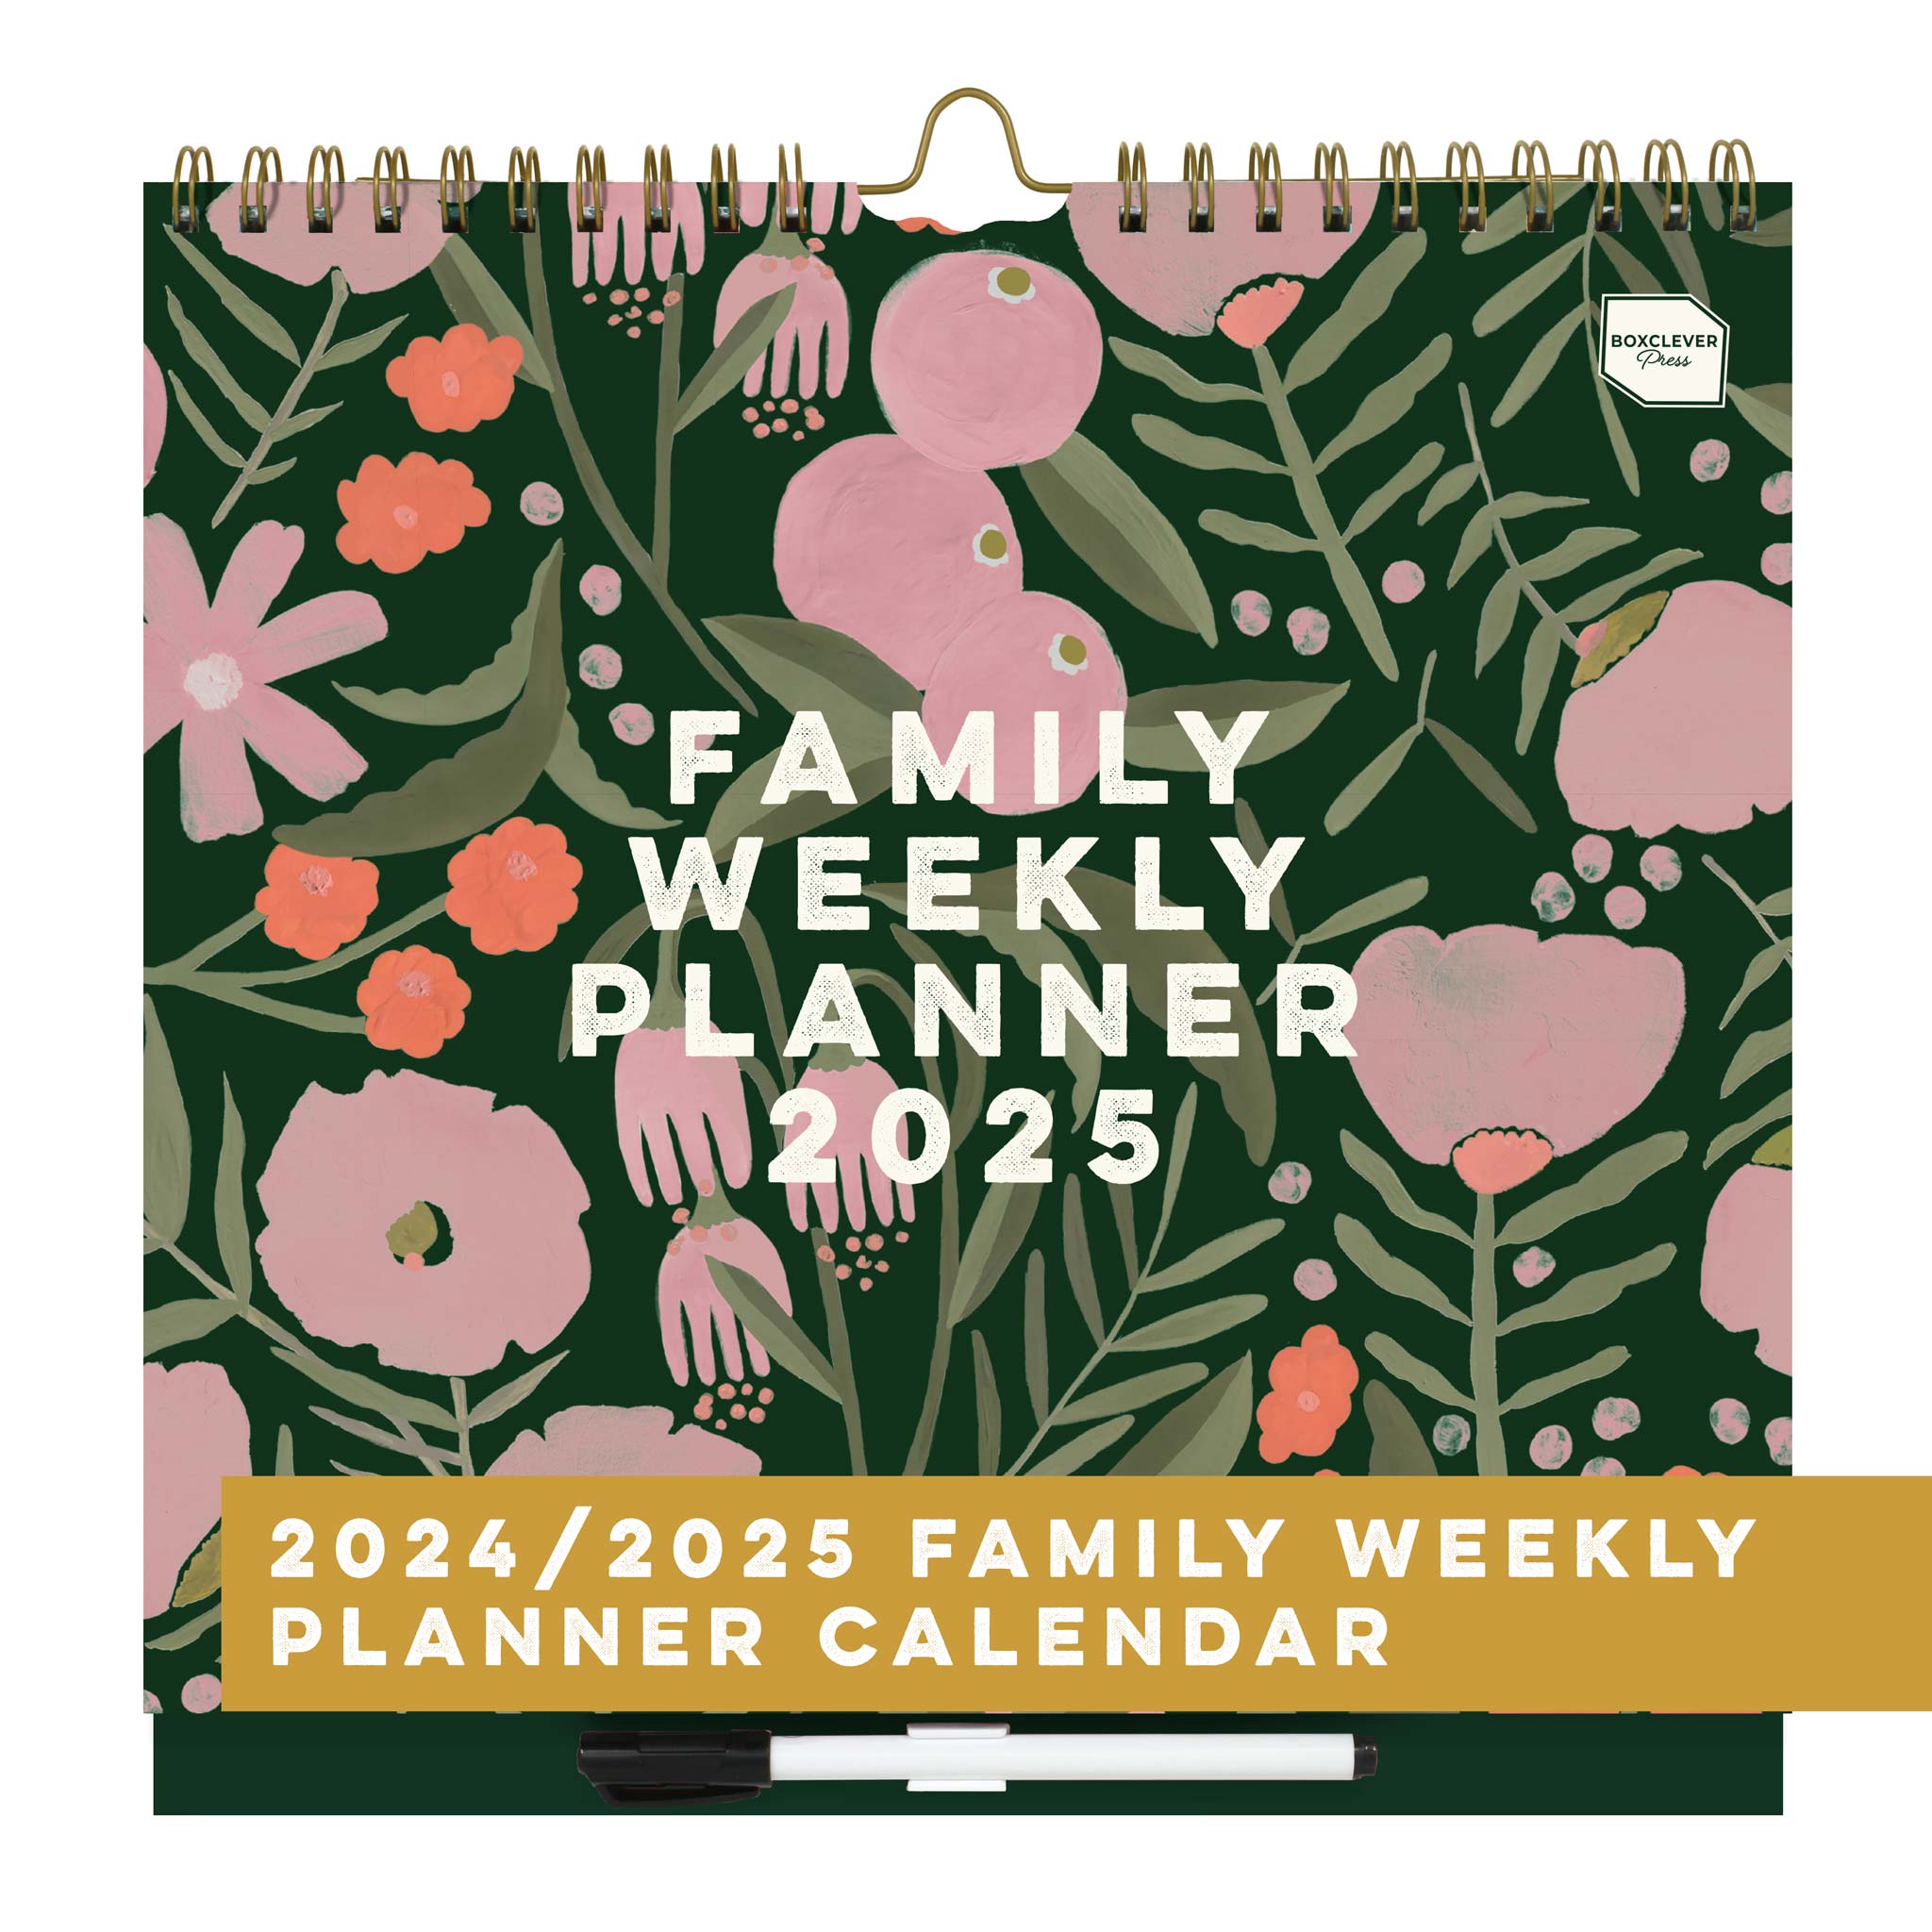 Boxclever Press Family Weekly Calendar 2025 with a green cover and floral print